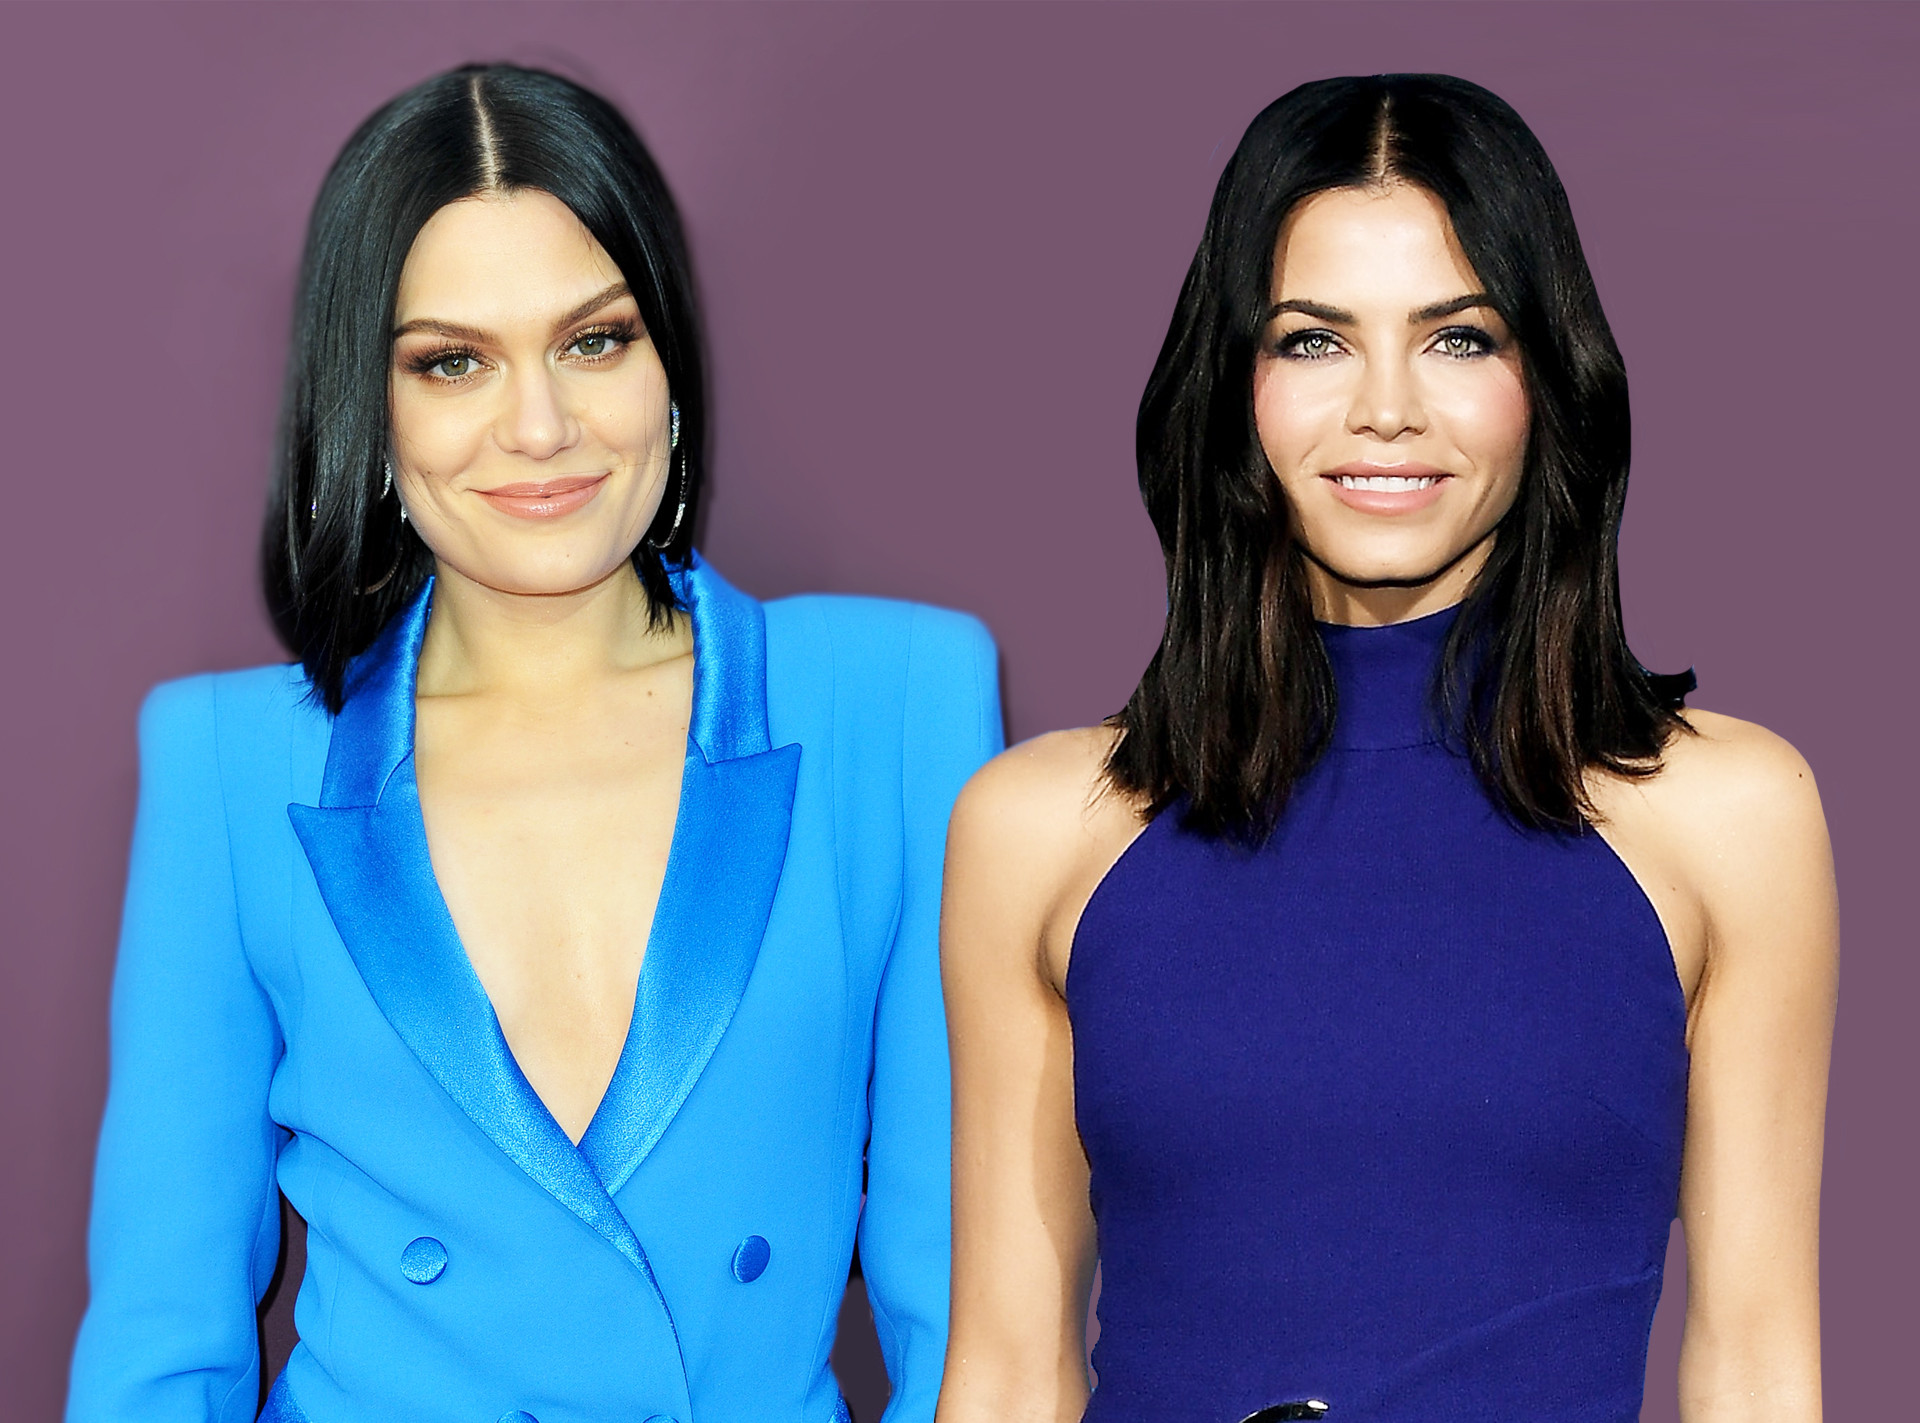 Let's Talk About How Jenna Dewan Responded to Those Jessie J Look-Alike Claims | E! News1920 x 1423